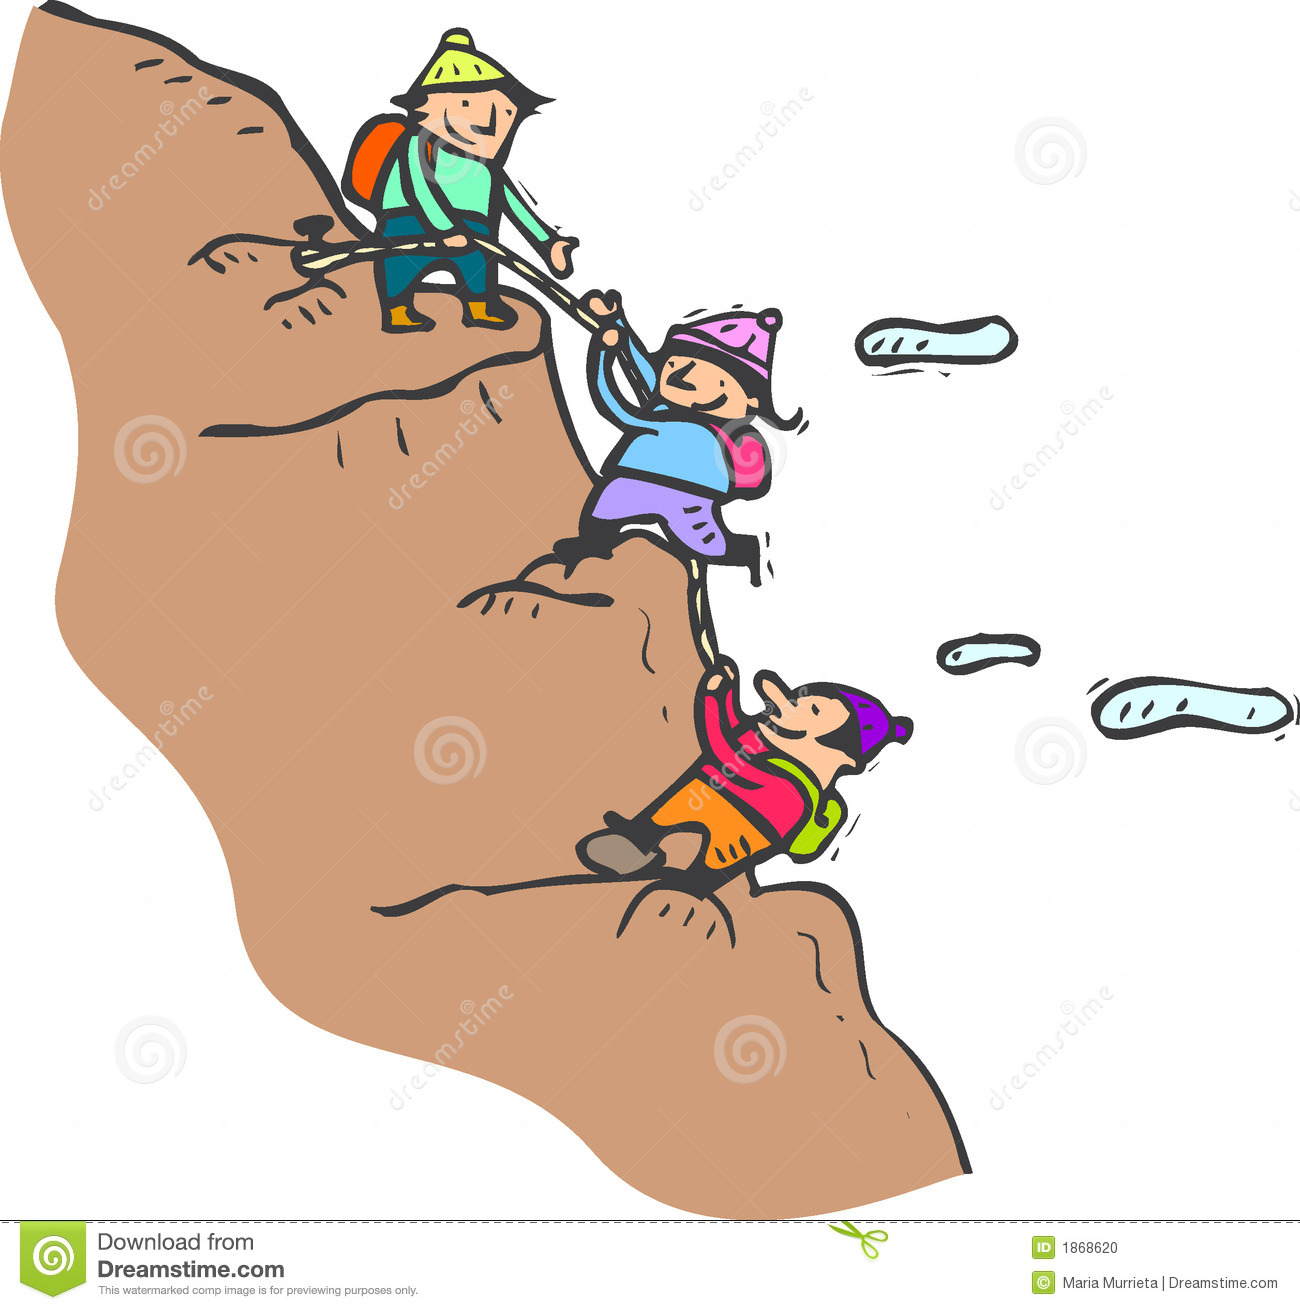 People Climbing A Mountain They Help Each Other As Good Team